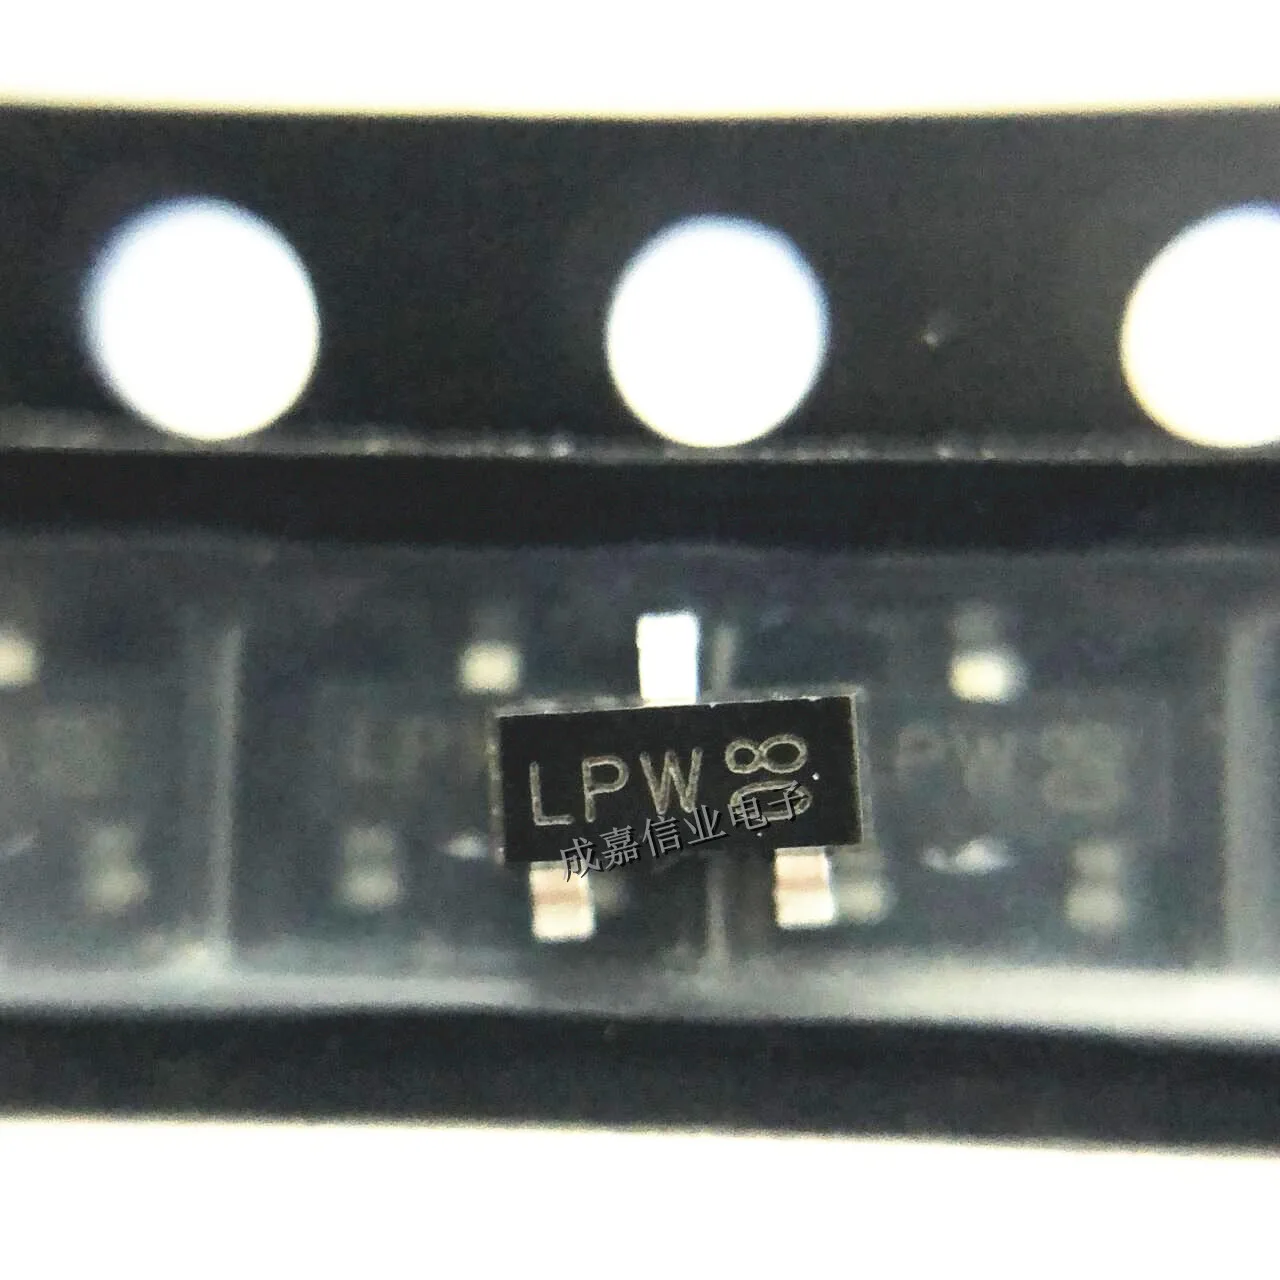 

100pcs/Lot 2N7002CK SOT-23-3 MARKING;LPW 60V, 0.3A N-CHANNEL TRENCH MOSFET Small Signal Field-Effect Transistor,